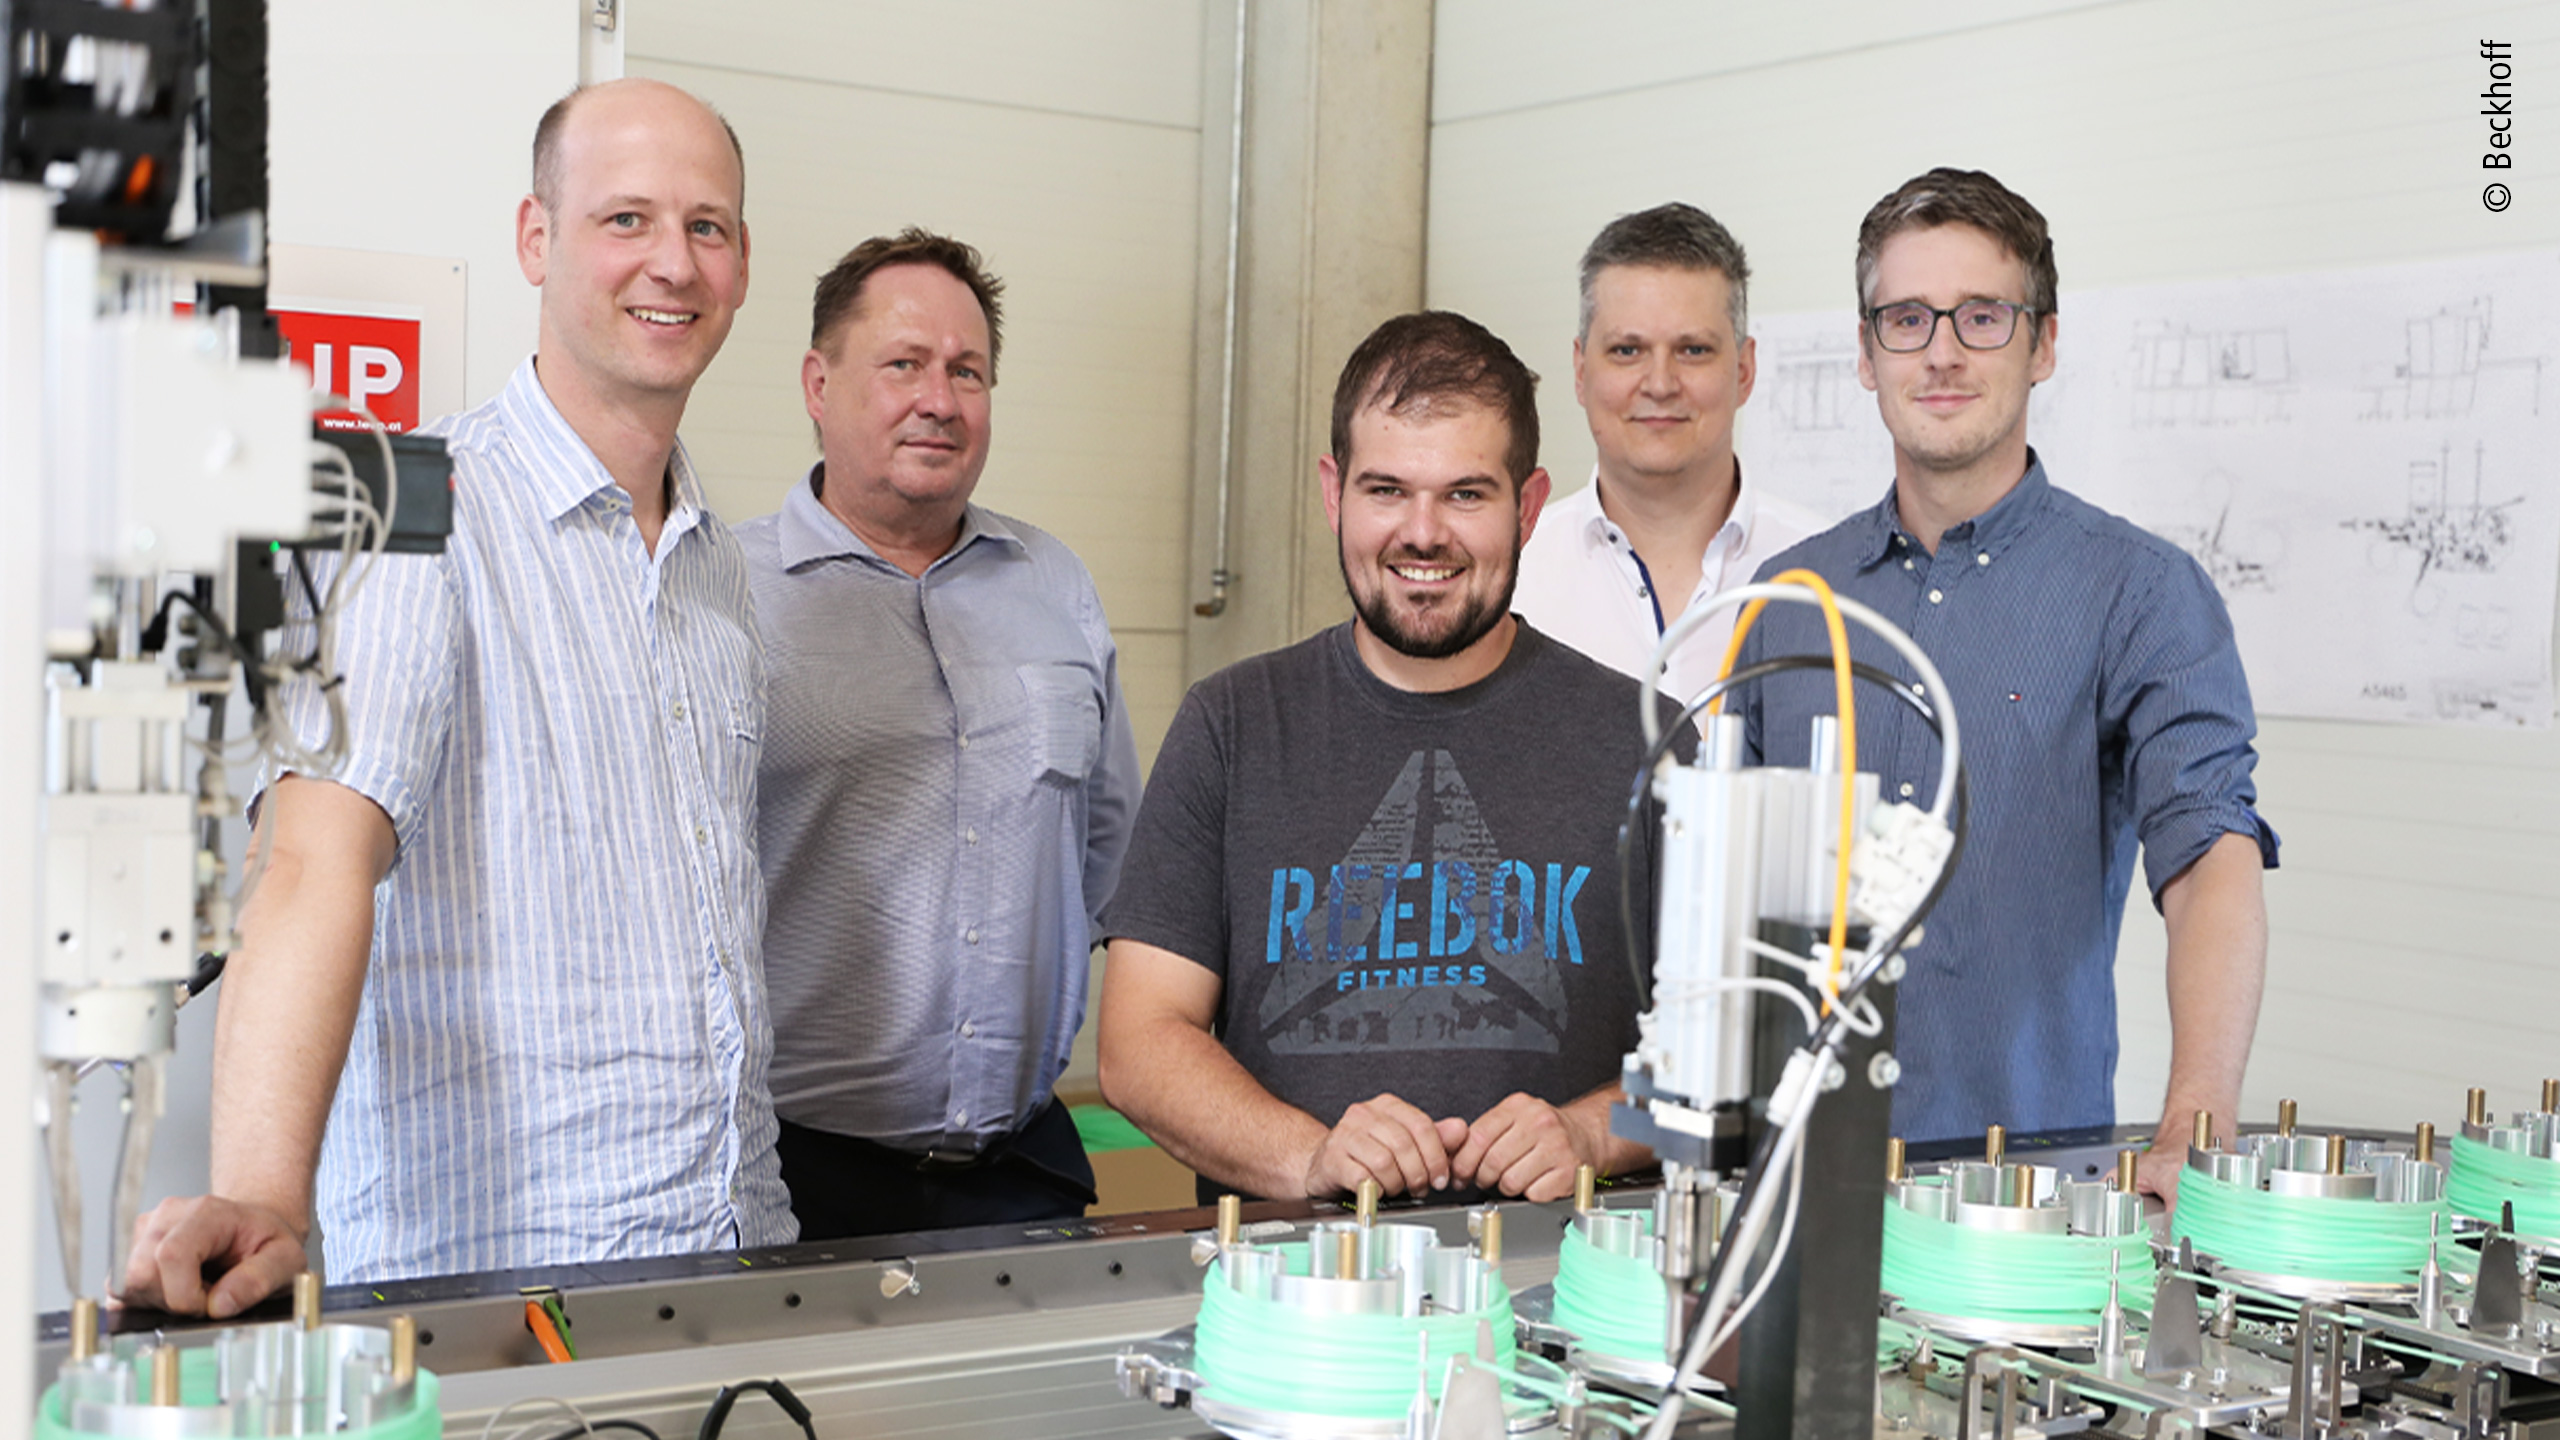 The team of experts who developed the configurable assembly line 